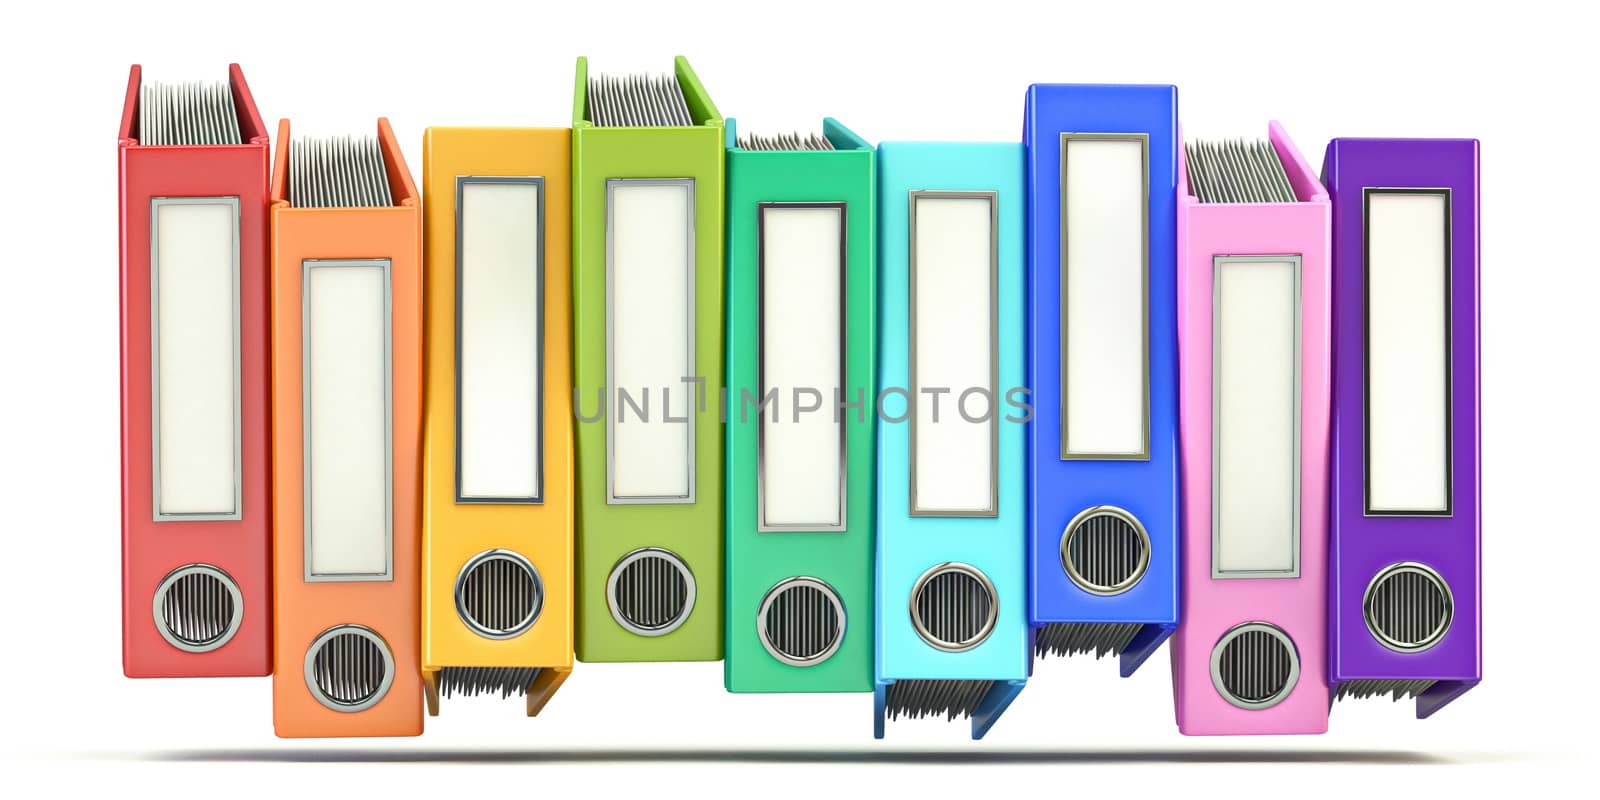 Multi colored office folders bunch 3D render illustration isolated on white background